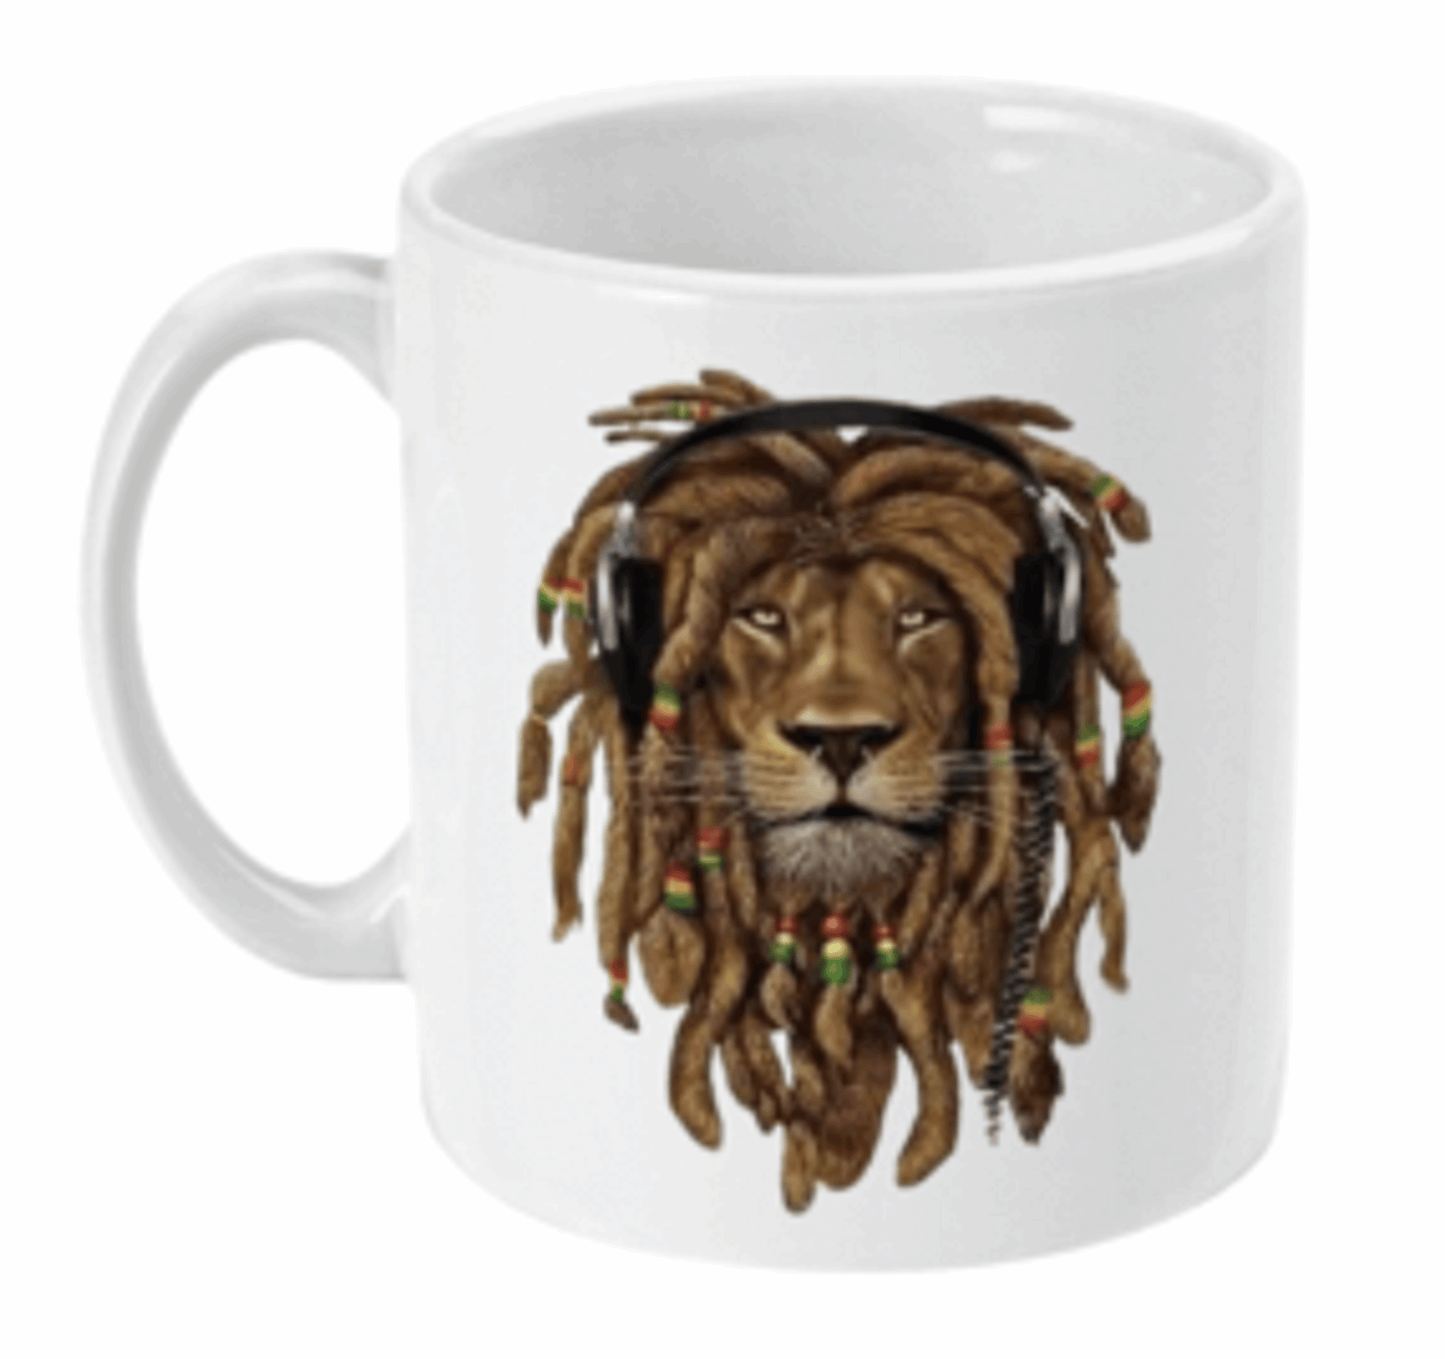  Dreadlocked Lion With Headphones Coffee Mug by Free Spirit Accessories sold by Free Spirit Accessories